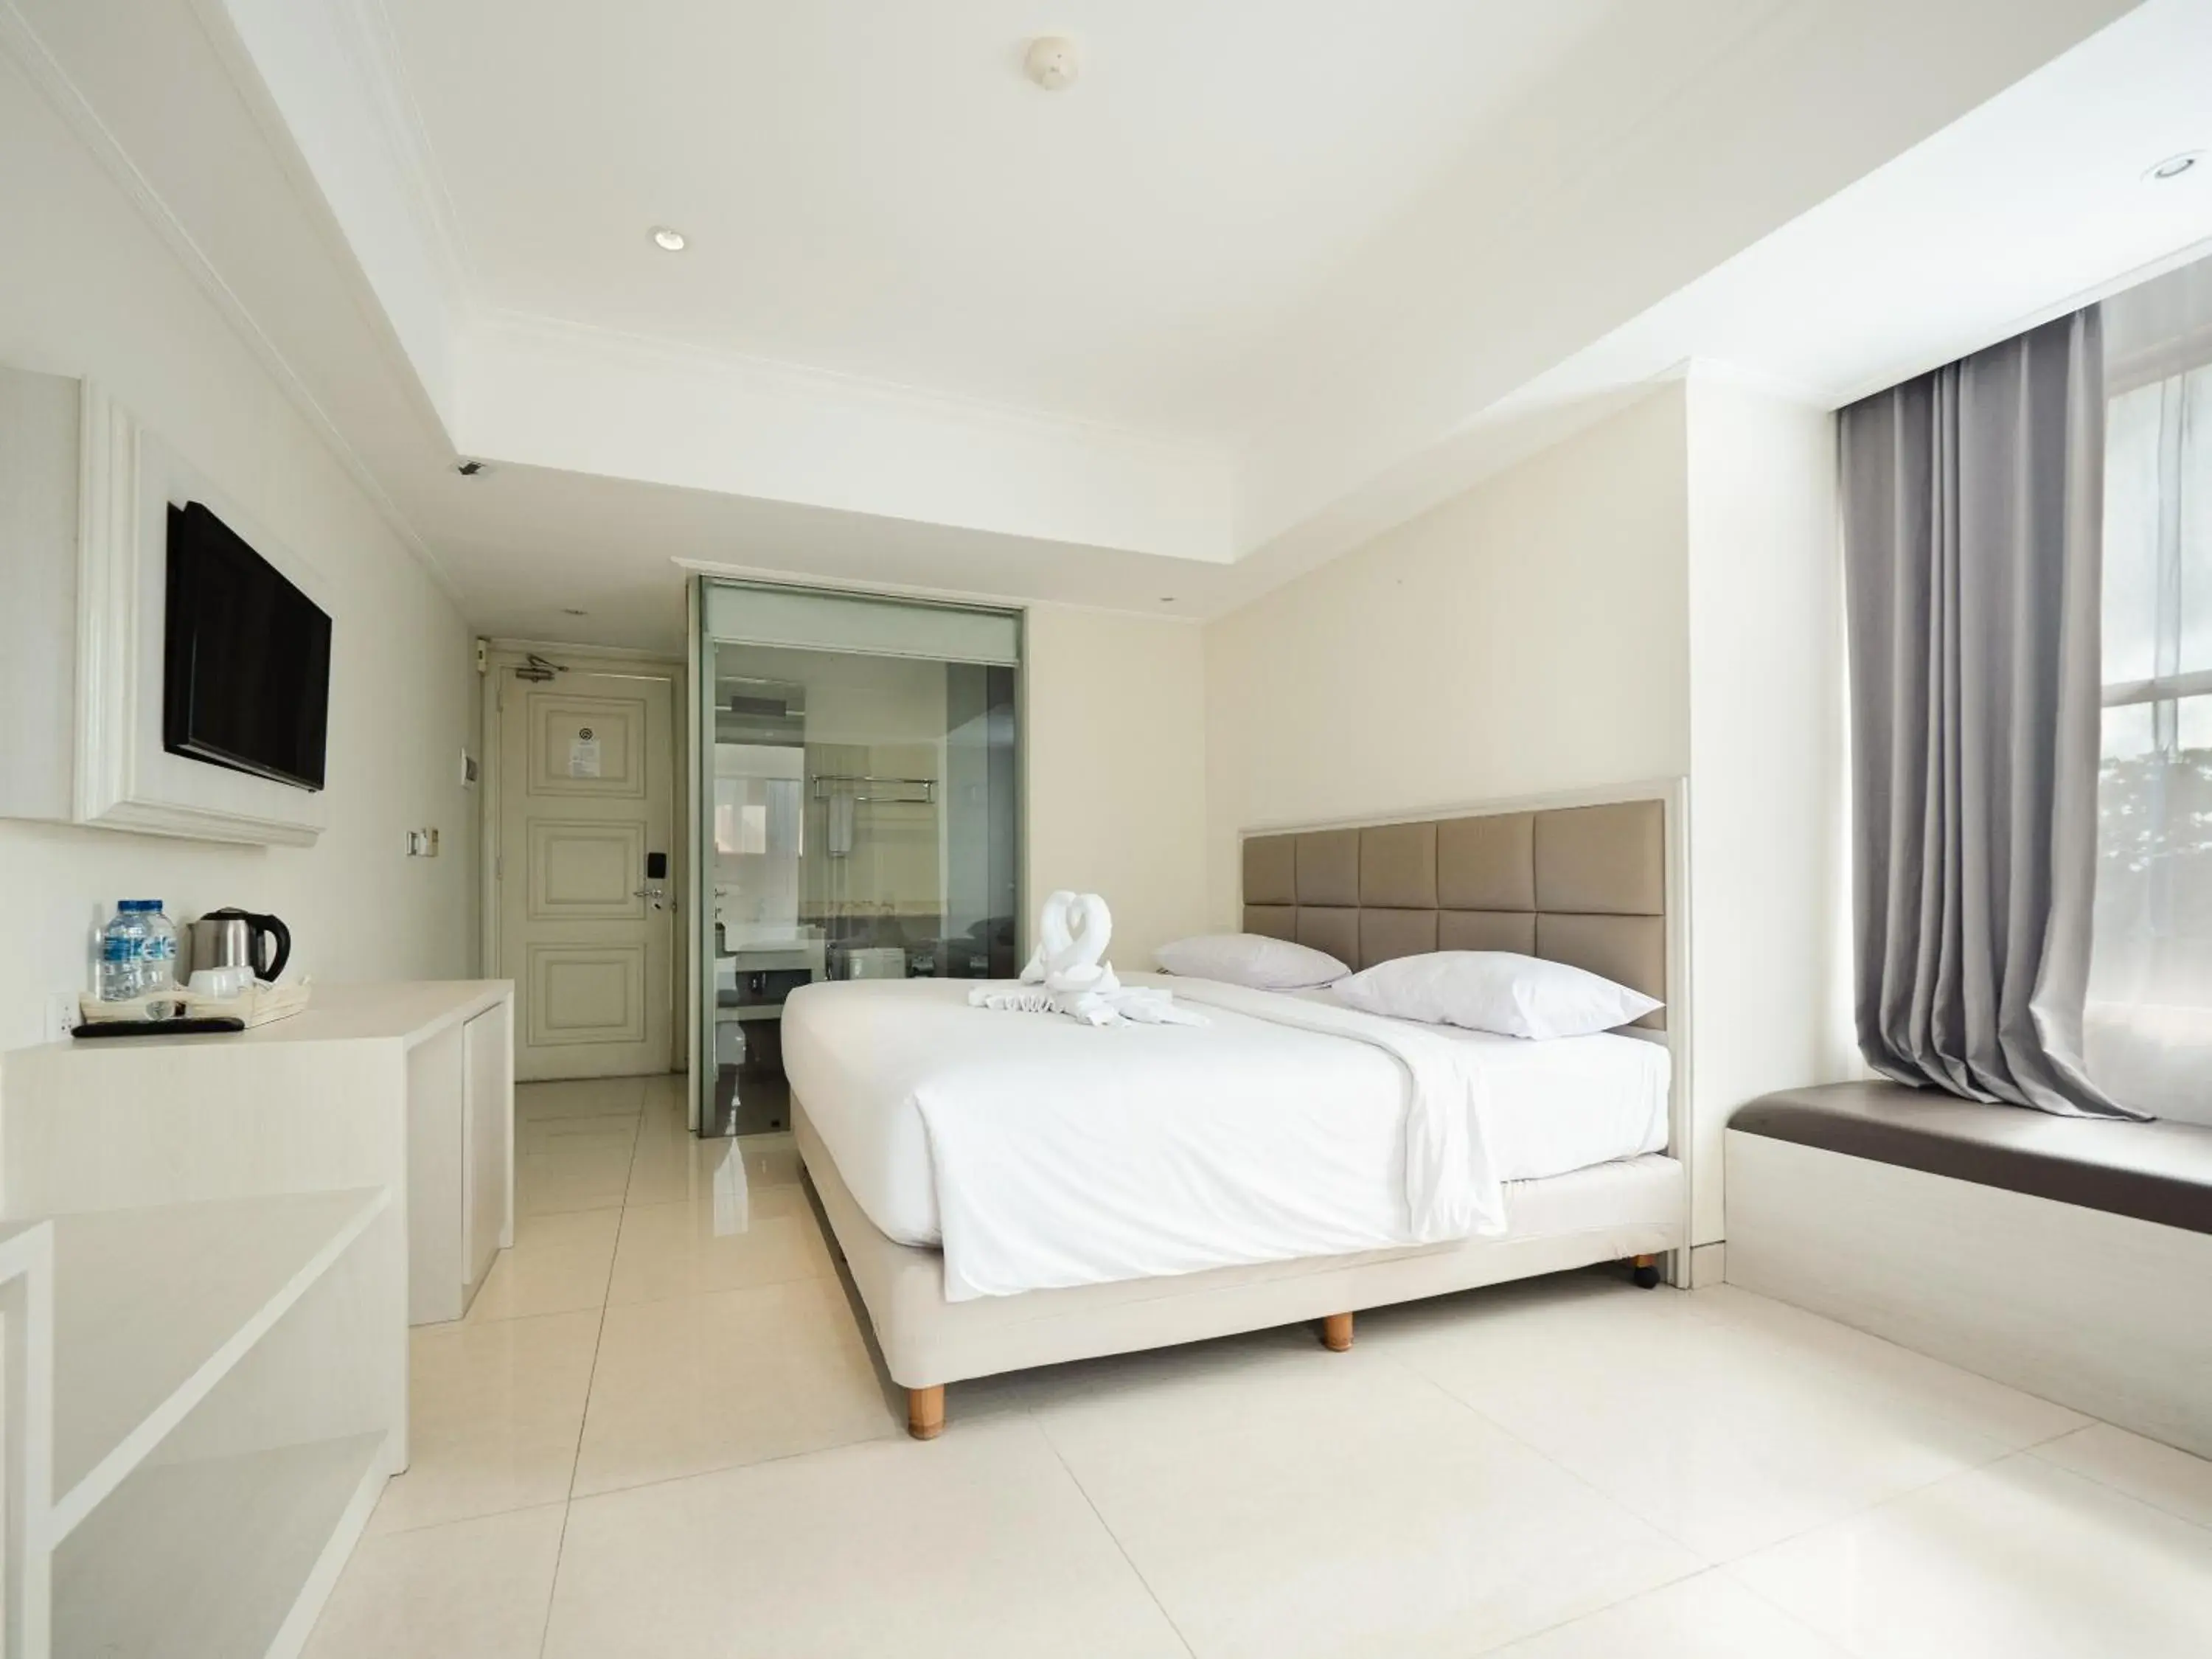 Bed in Alron Hotel Kuta Powered by Archipelago